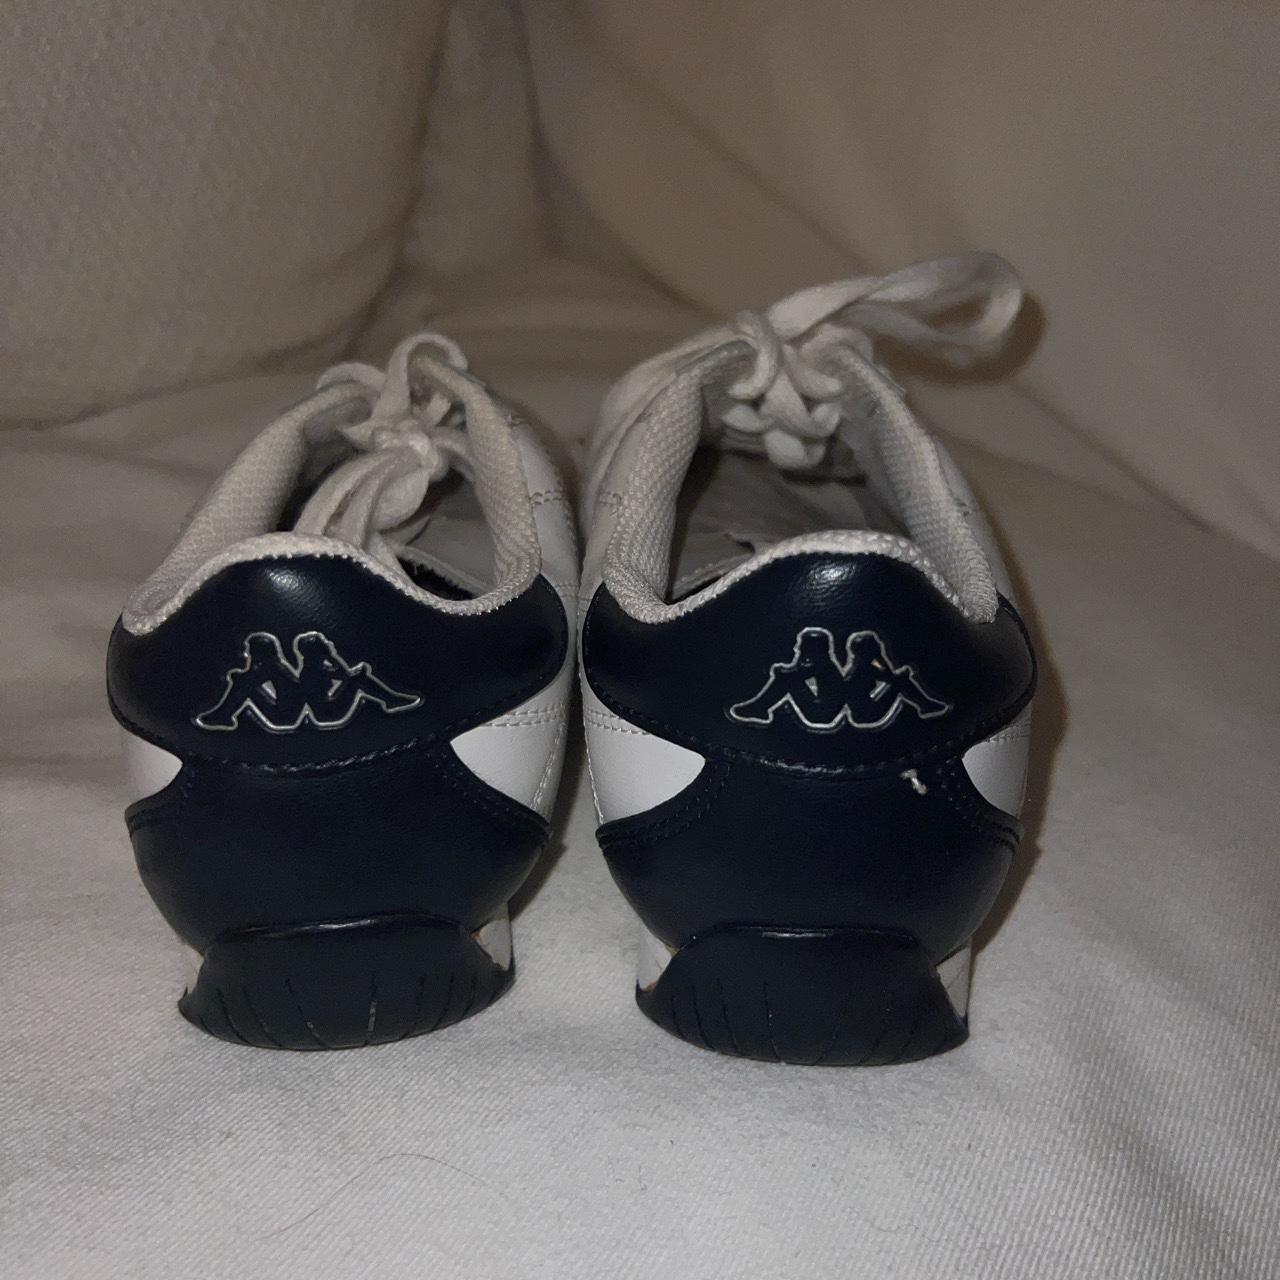 Slovenia. 39 in - Depop Size Vintage sneakers! Kappa Purchases